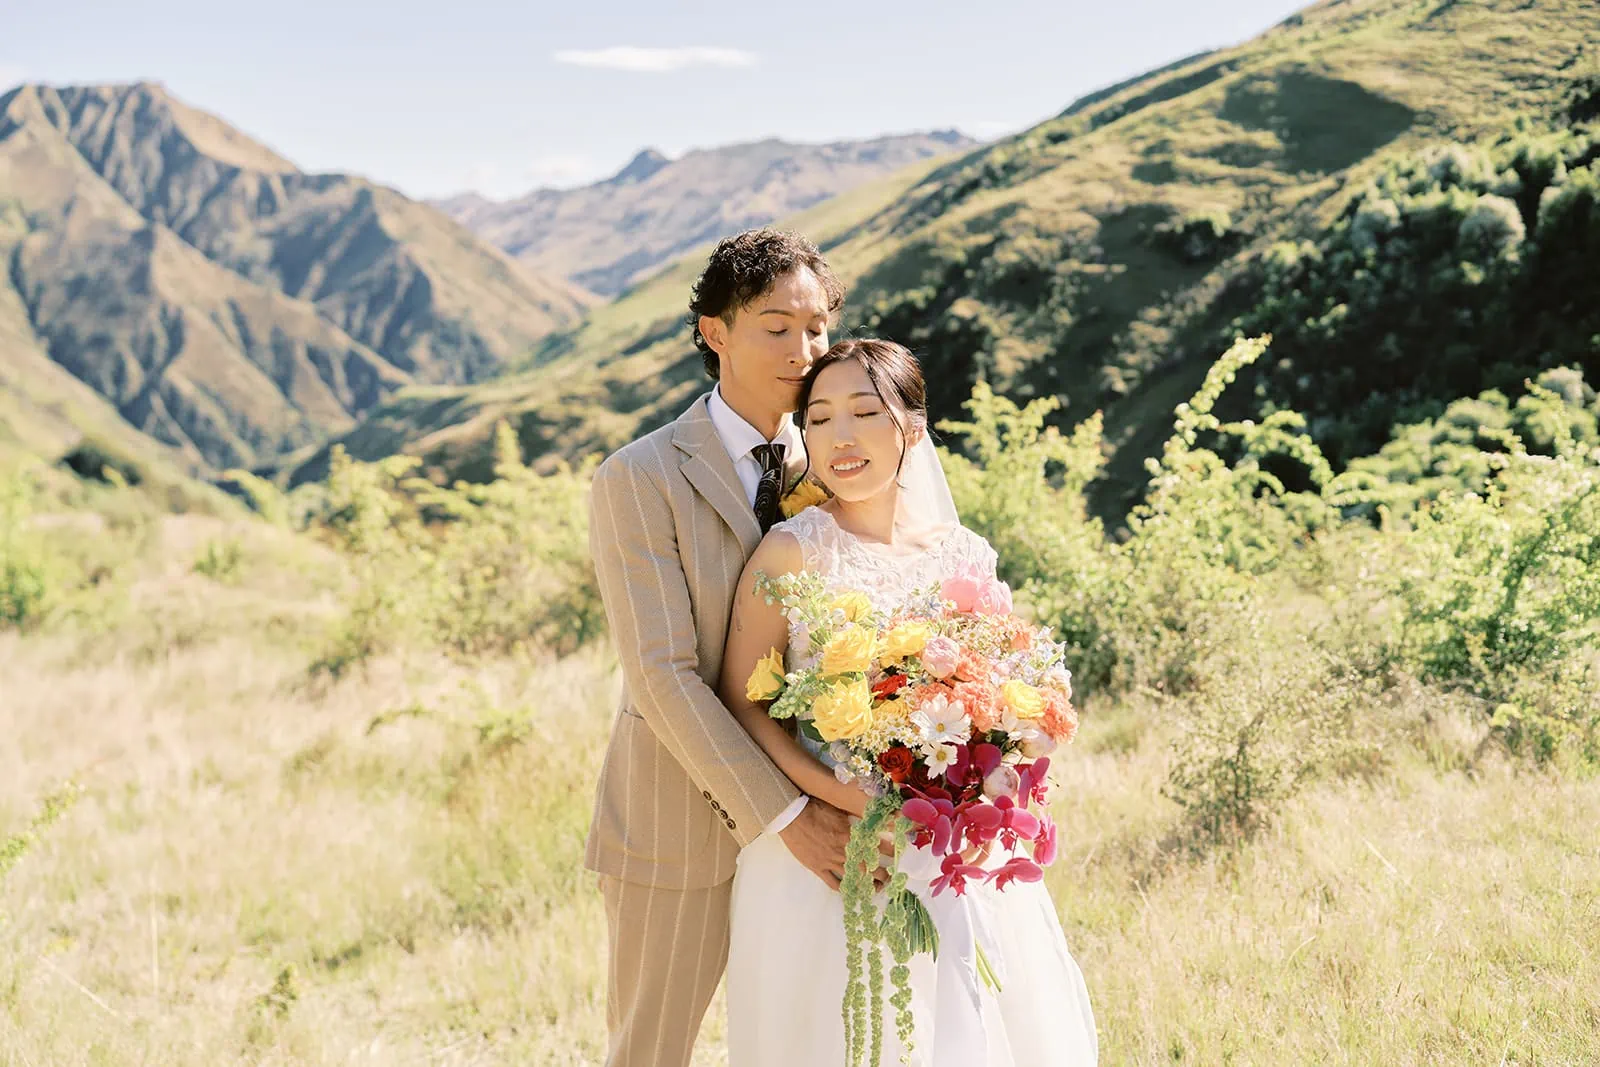 Queenstown Elopement Heli Wedding Photographer クイーンズタウン結婚式 | A Queenstown bride and groom standing in a field with mountains in the background.